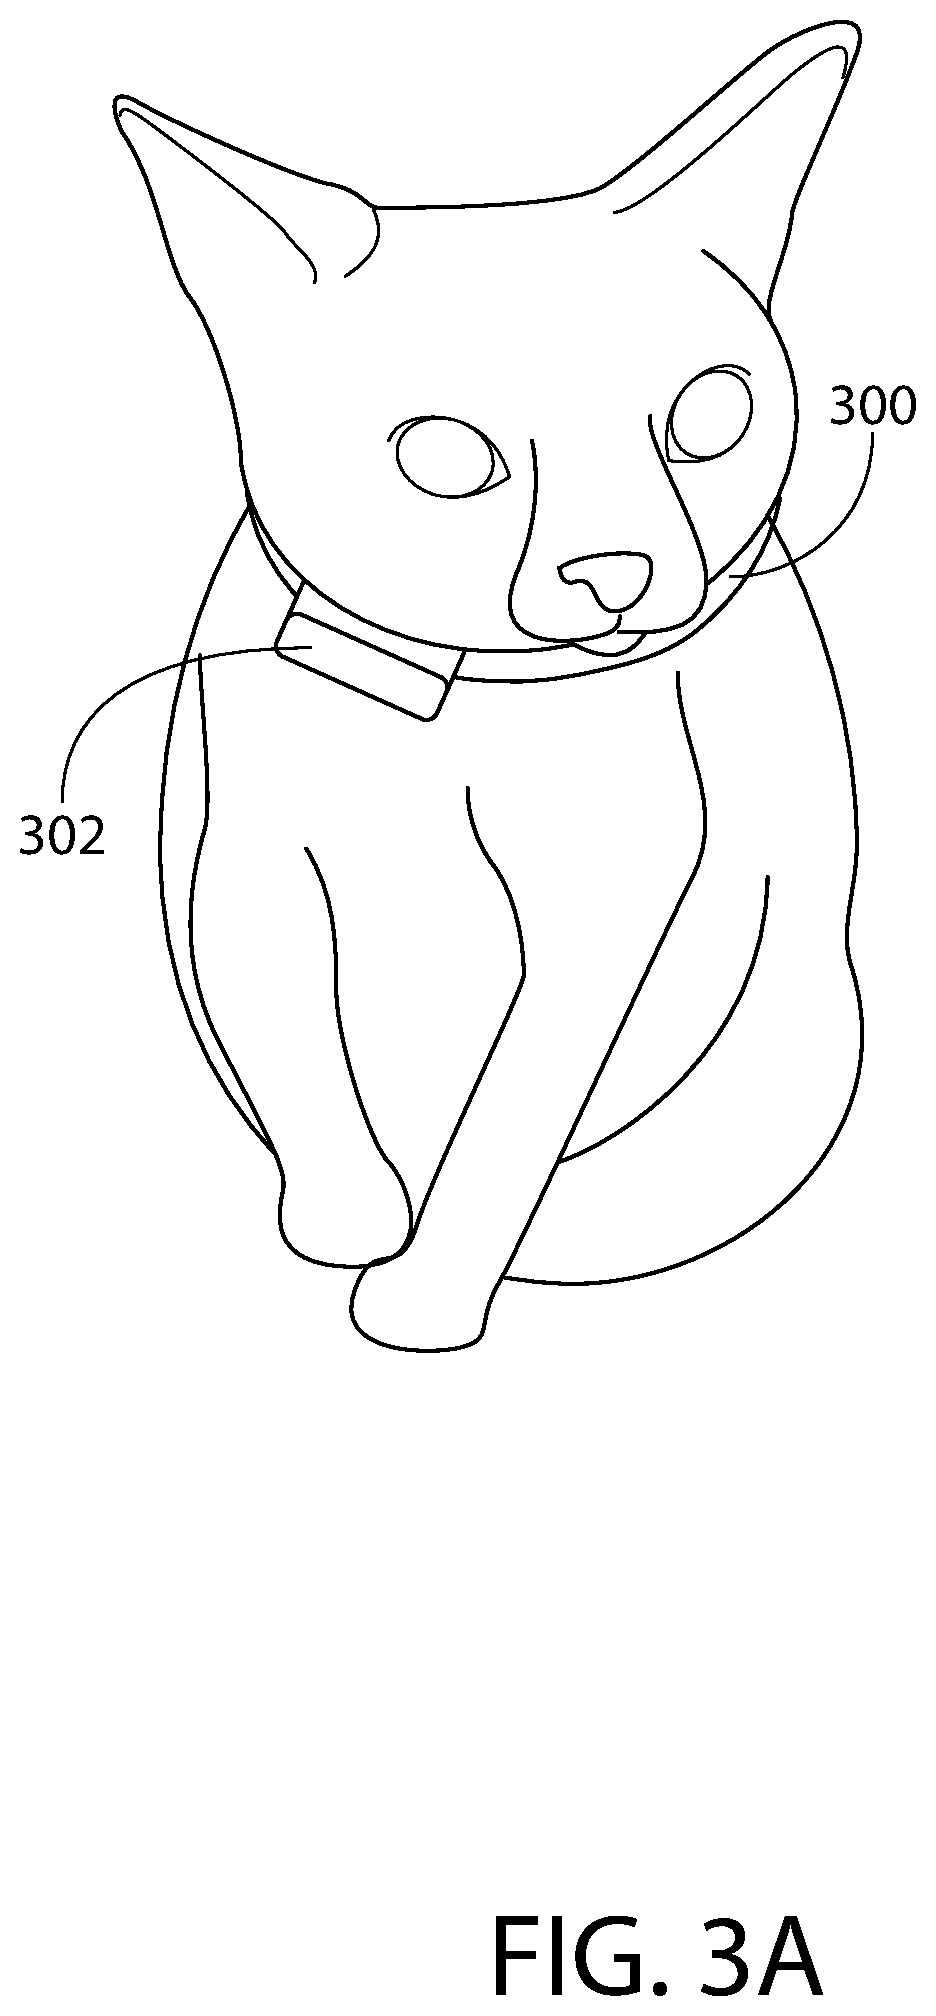 System and Method for Monitoring Motion of an Animal